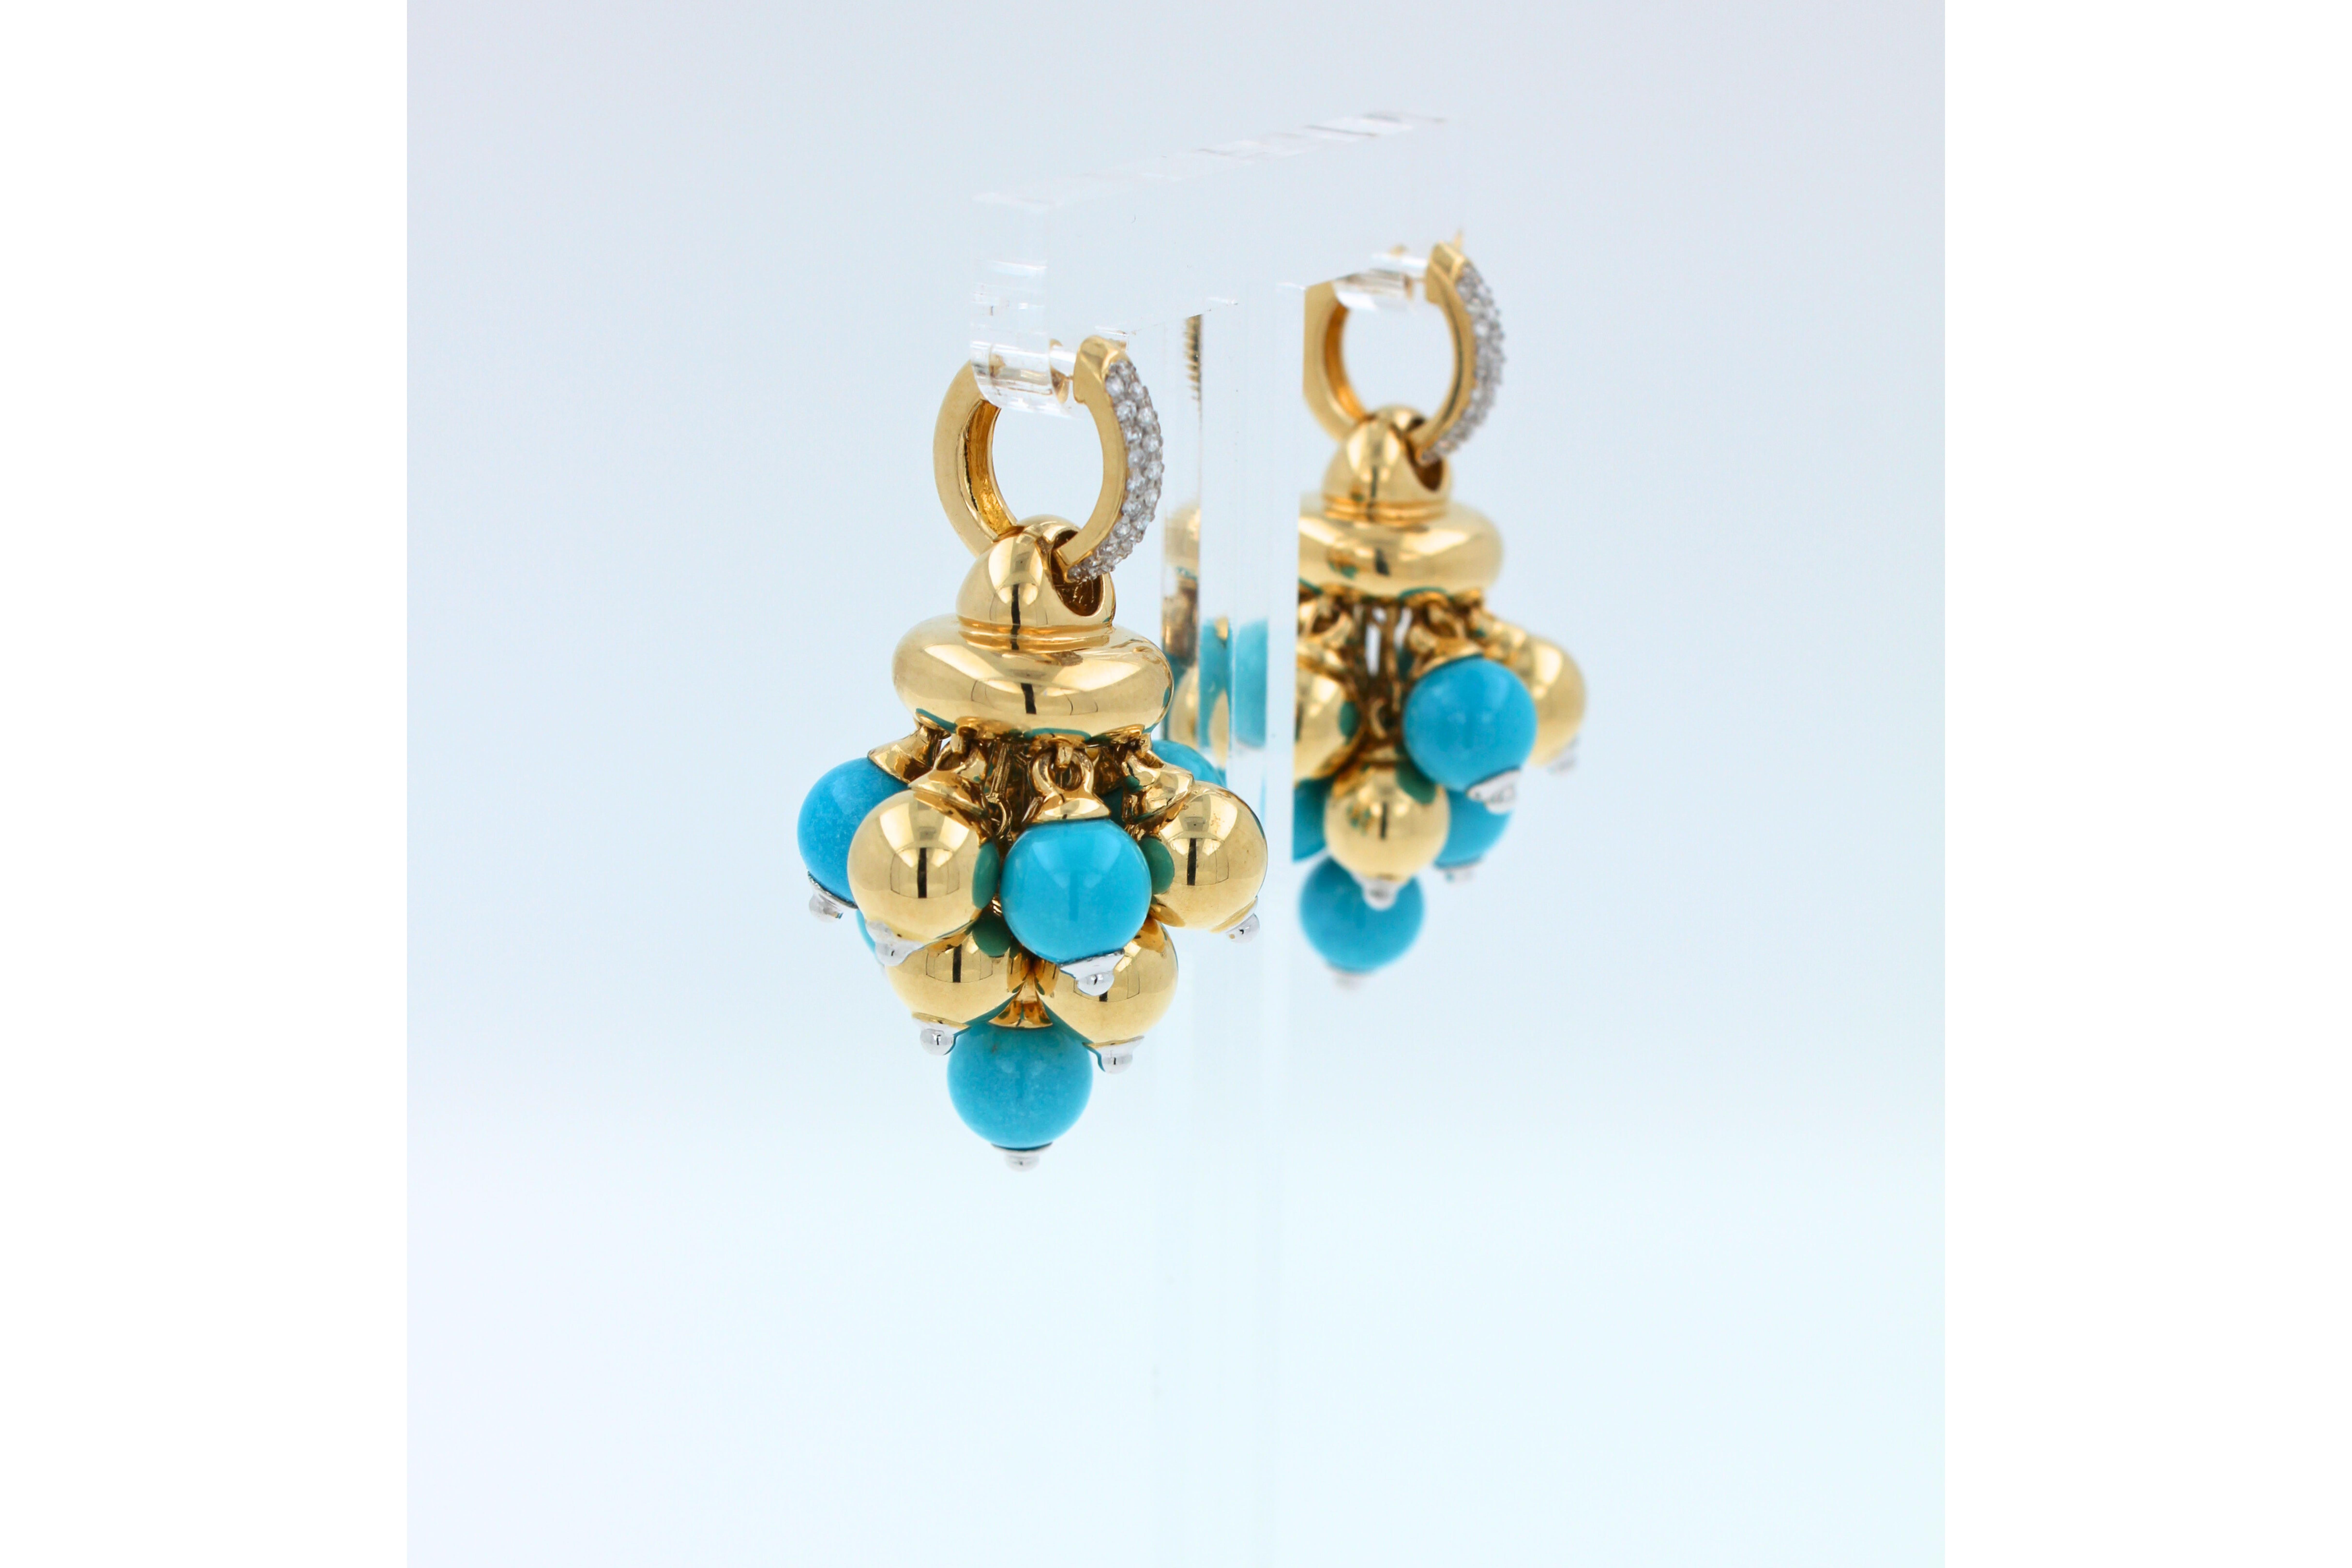 Very Beautiful, Unique, High-End Craftmanship with a polished finish. A versatile high-luxury fine set of earrings that can be worn with any outfit.
18K Yellow Gold & 18K White Gold Details 
Turquoise Gemstone Spheres
40.50 grams
0.20 carats